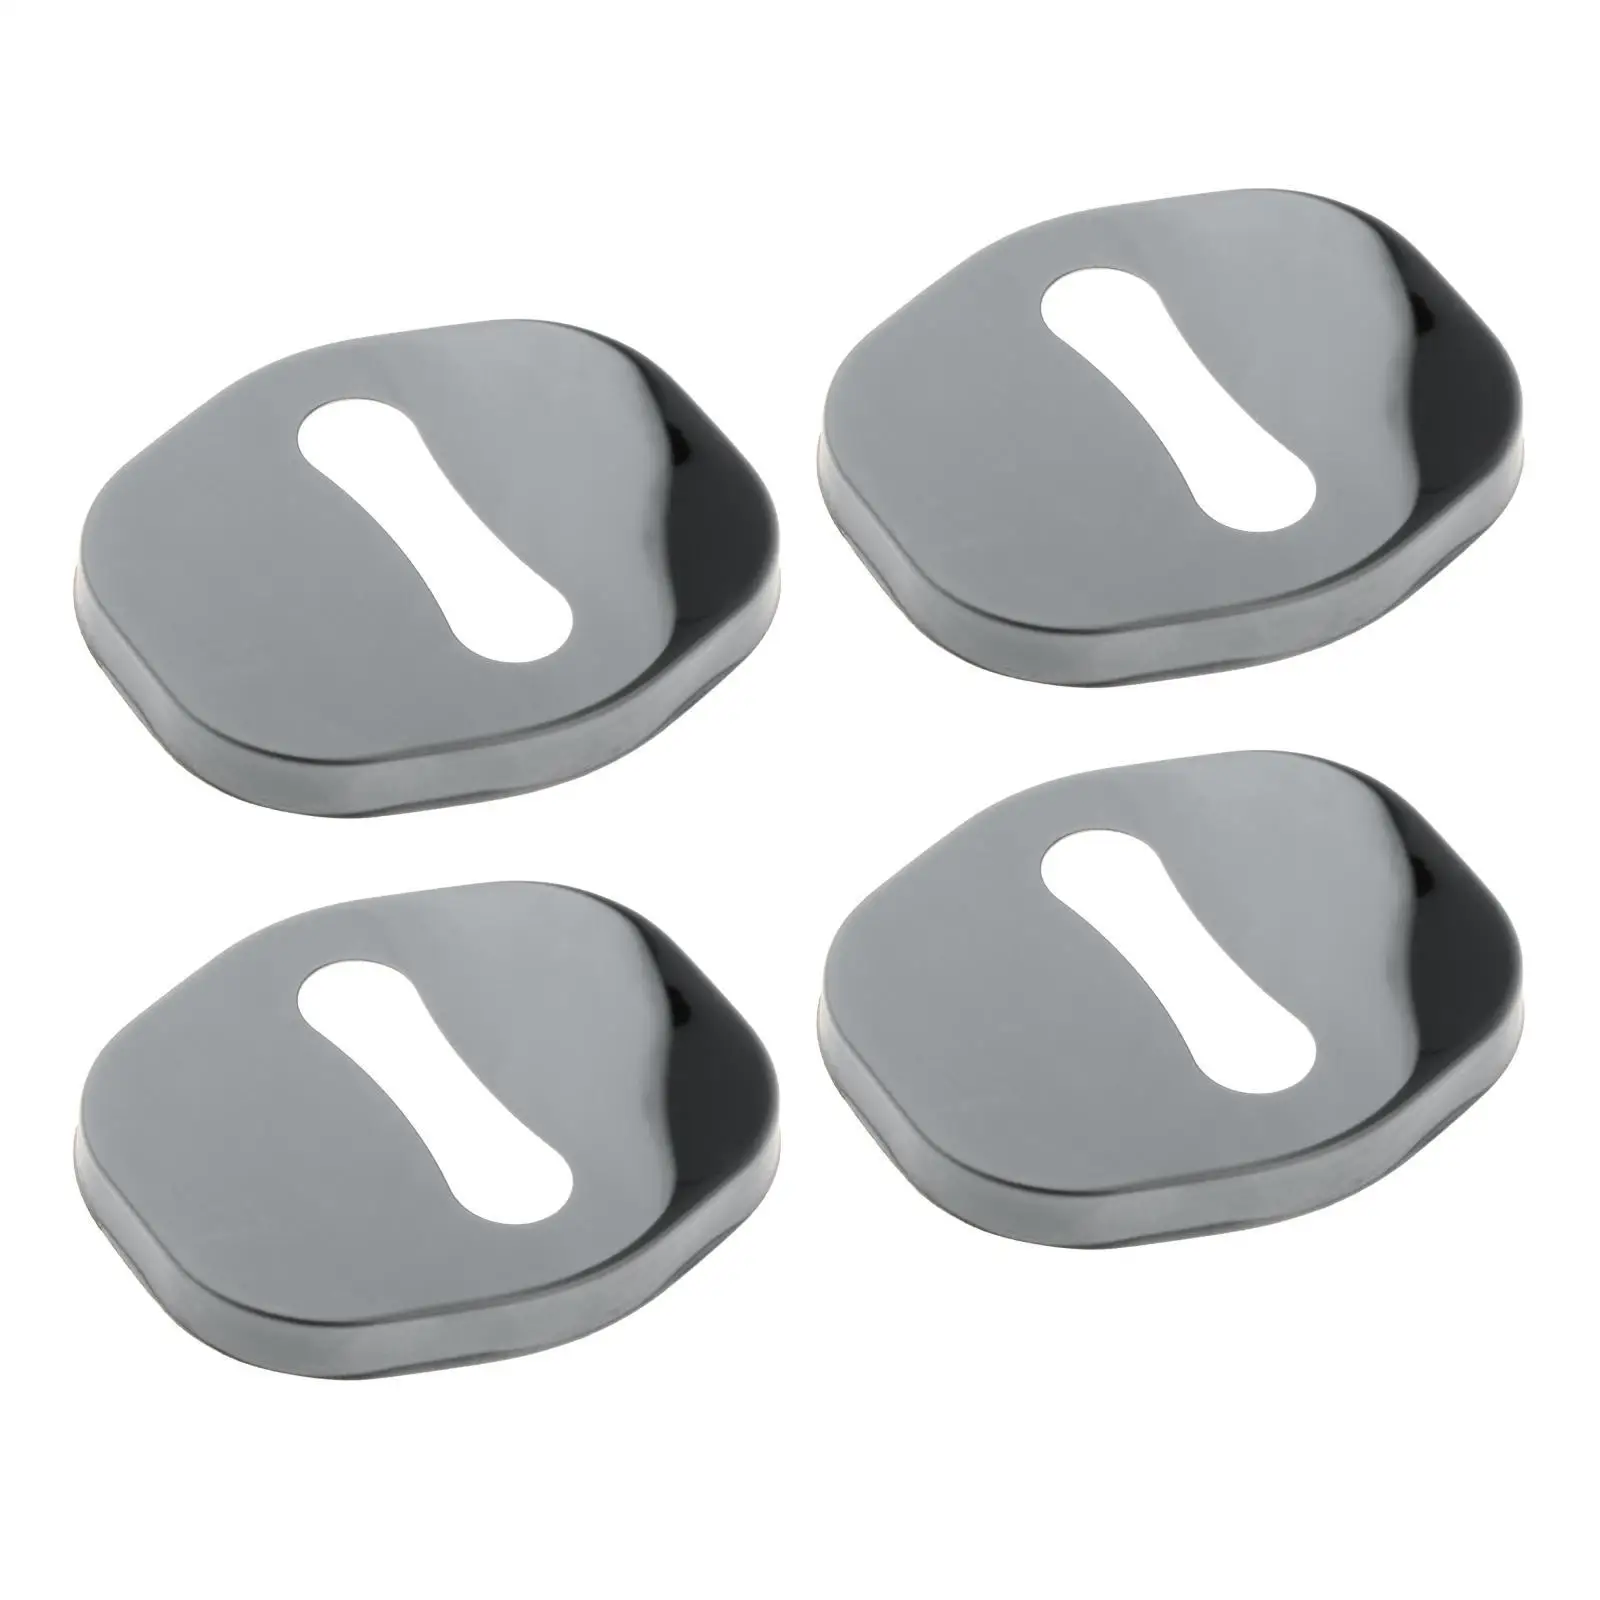 4 Pieces Stainless Steel Car Door Lock Striker Cover Decor Accessory Metal Interior Protection for Auto